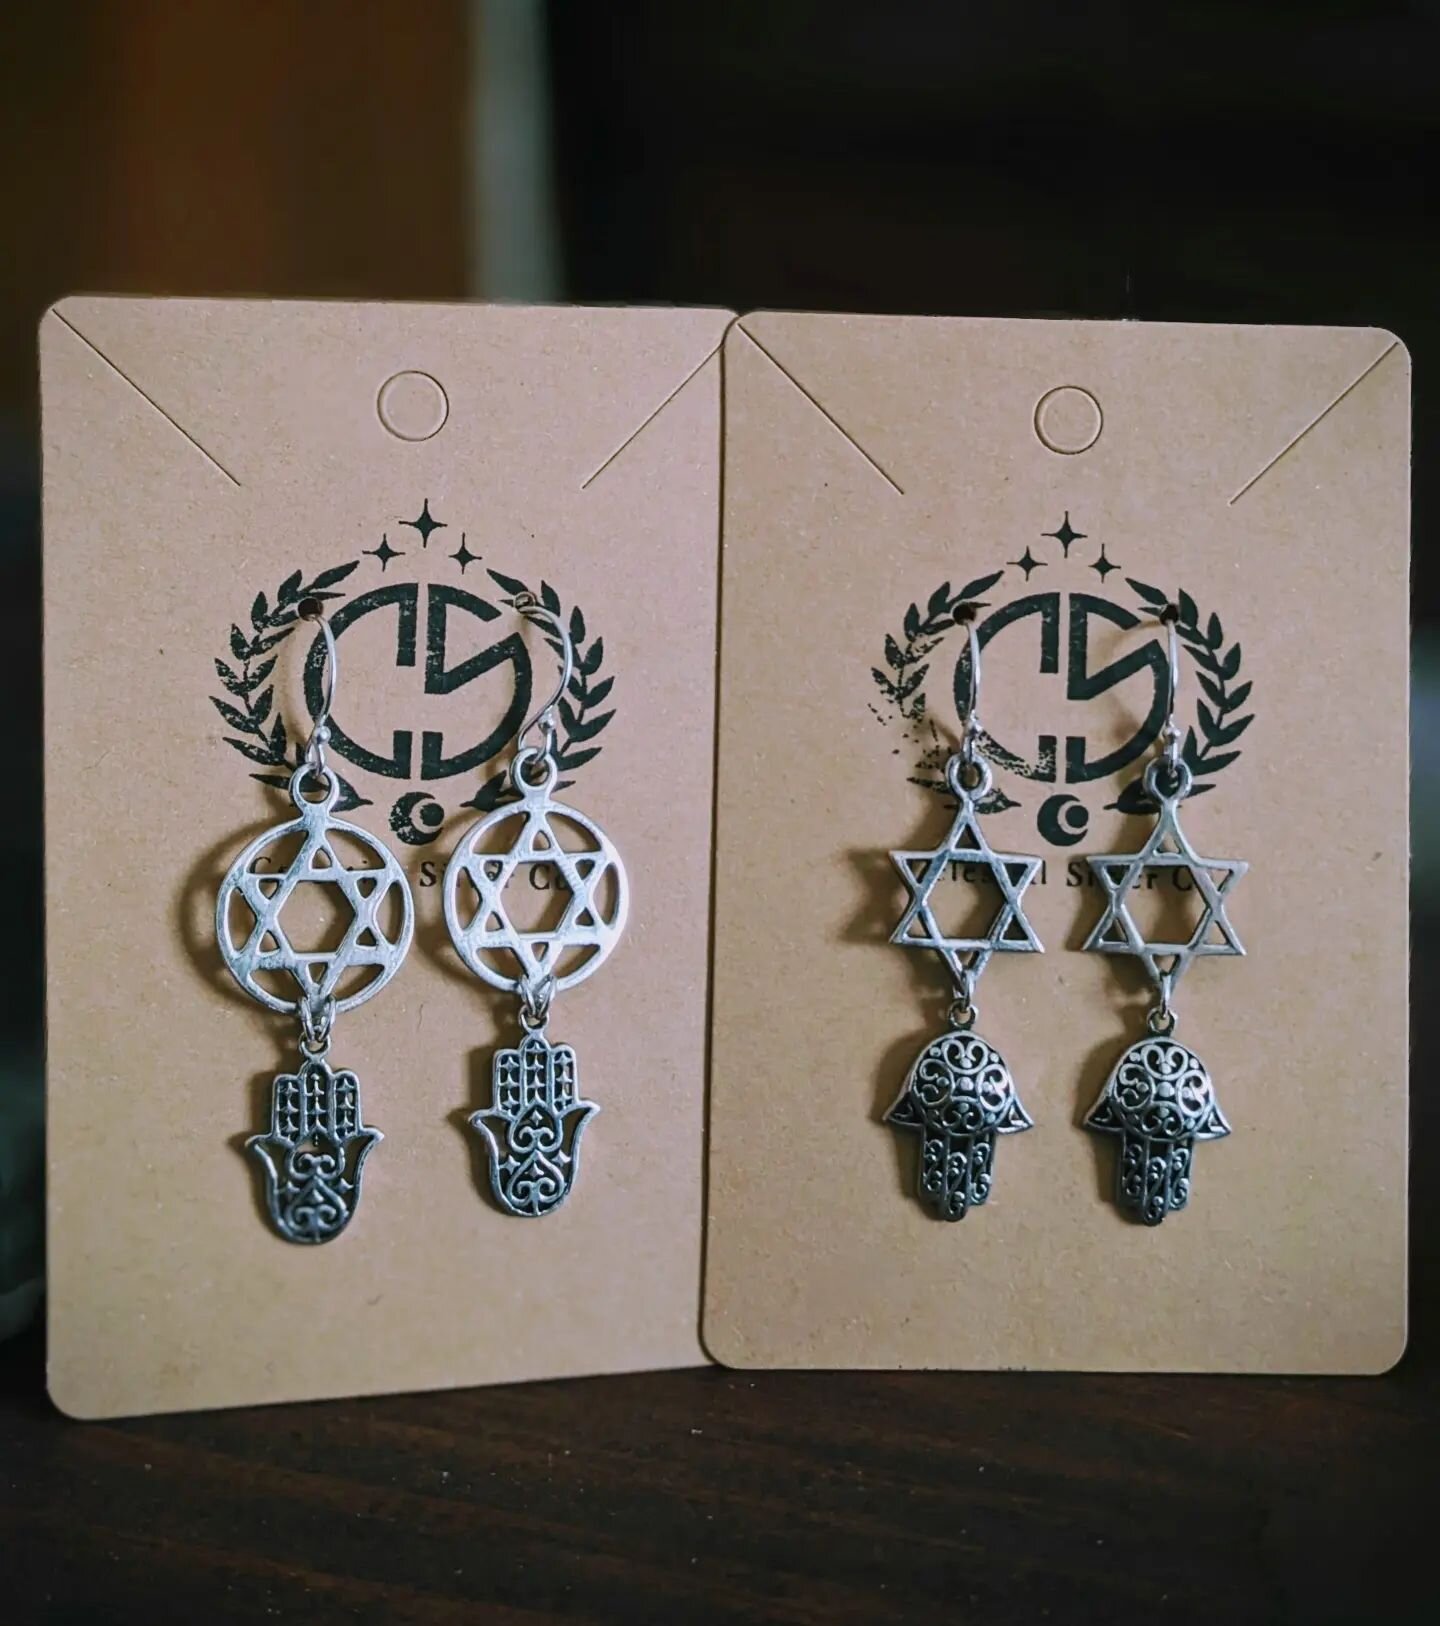 More Judaica, as requested! These two pairs of sterling silver earrings will be available to purchase in the online shop today at Noon EST!